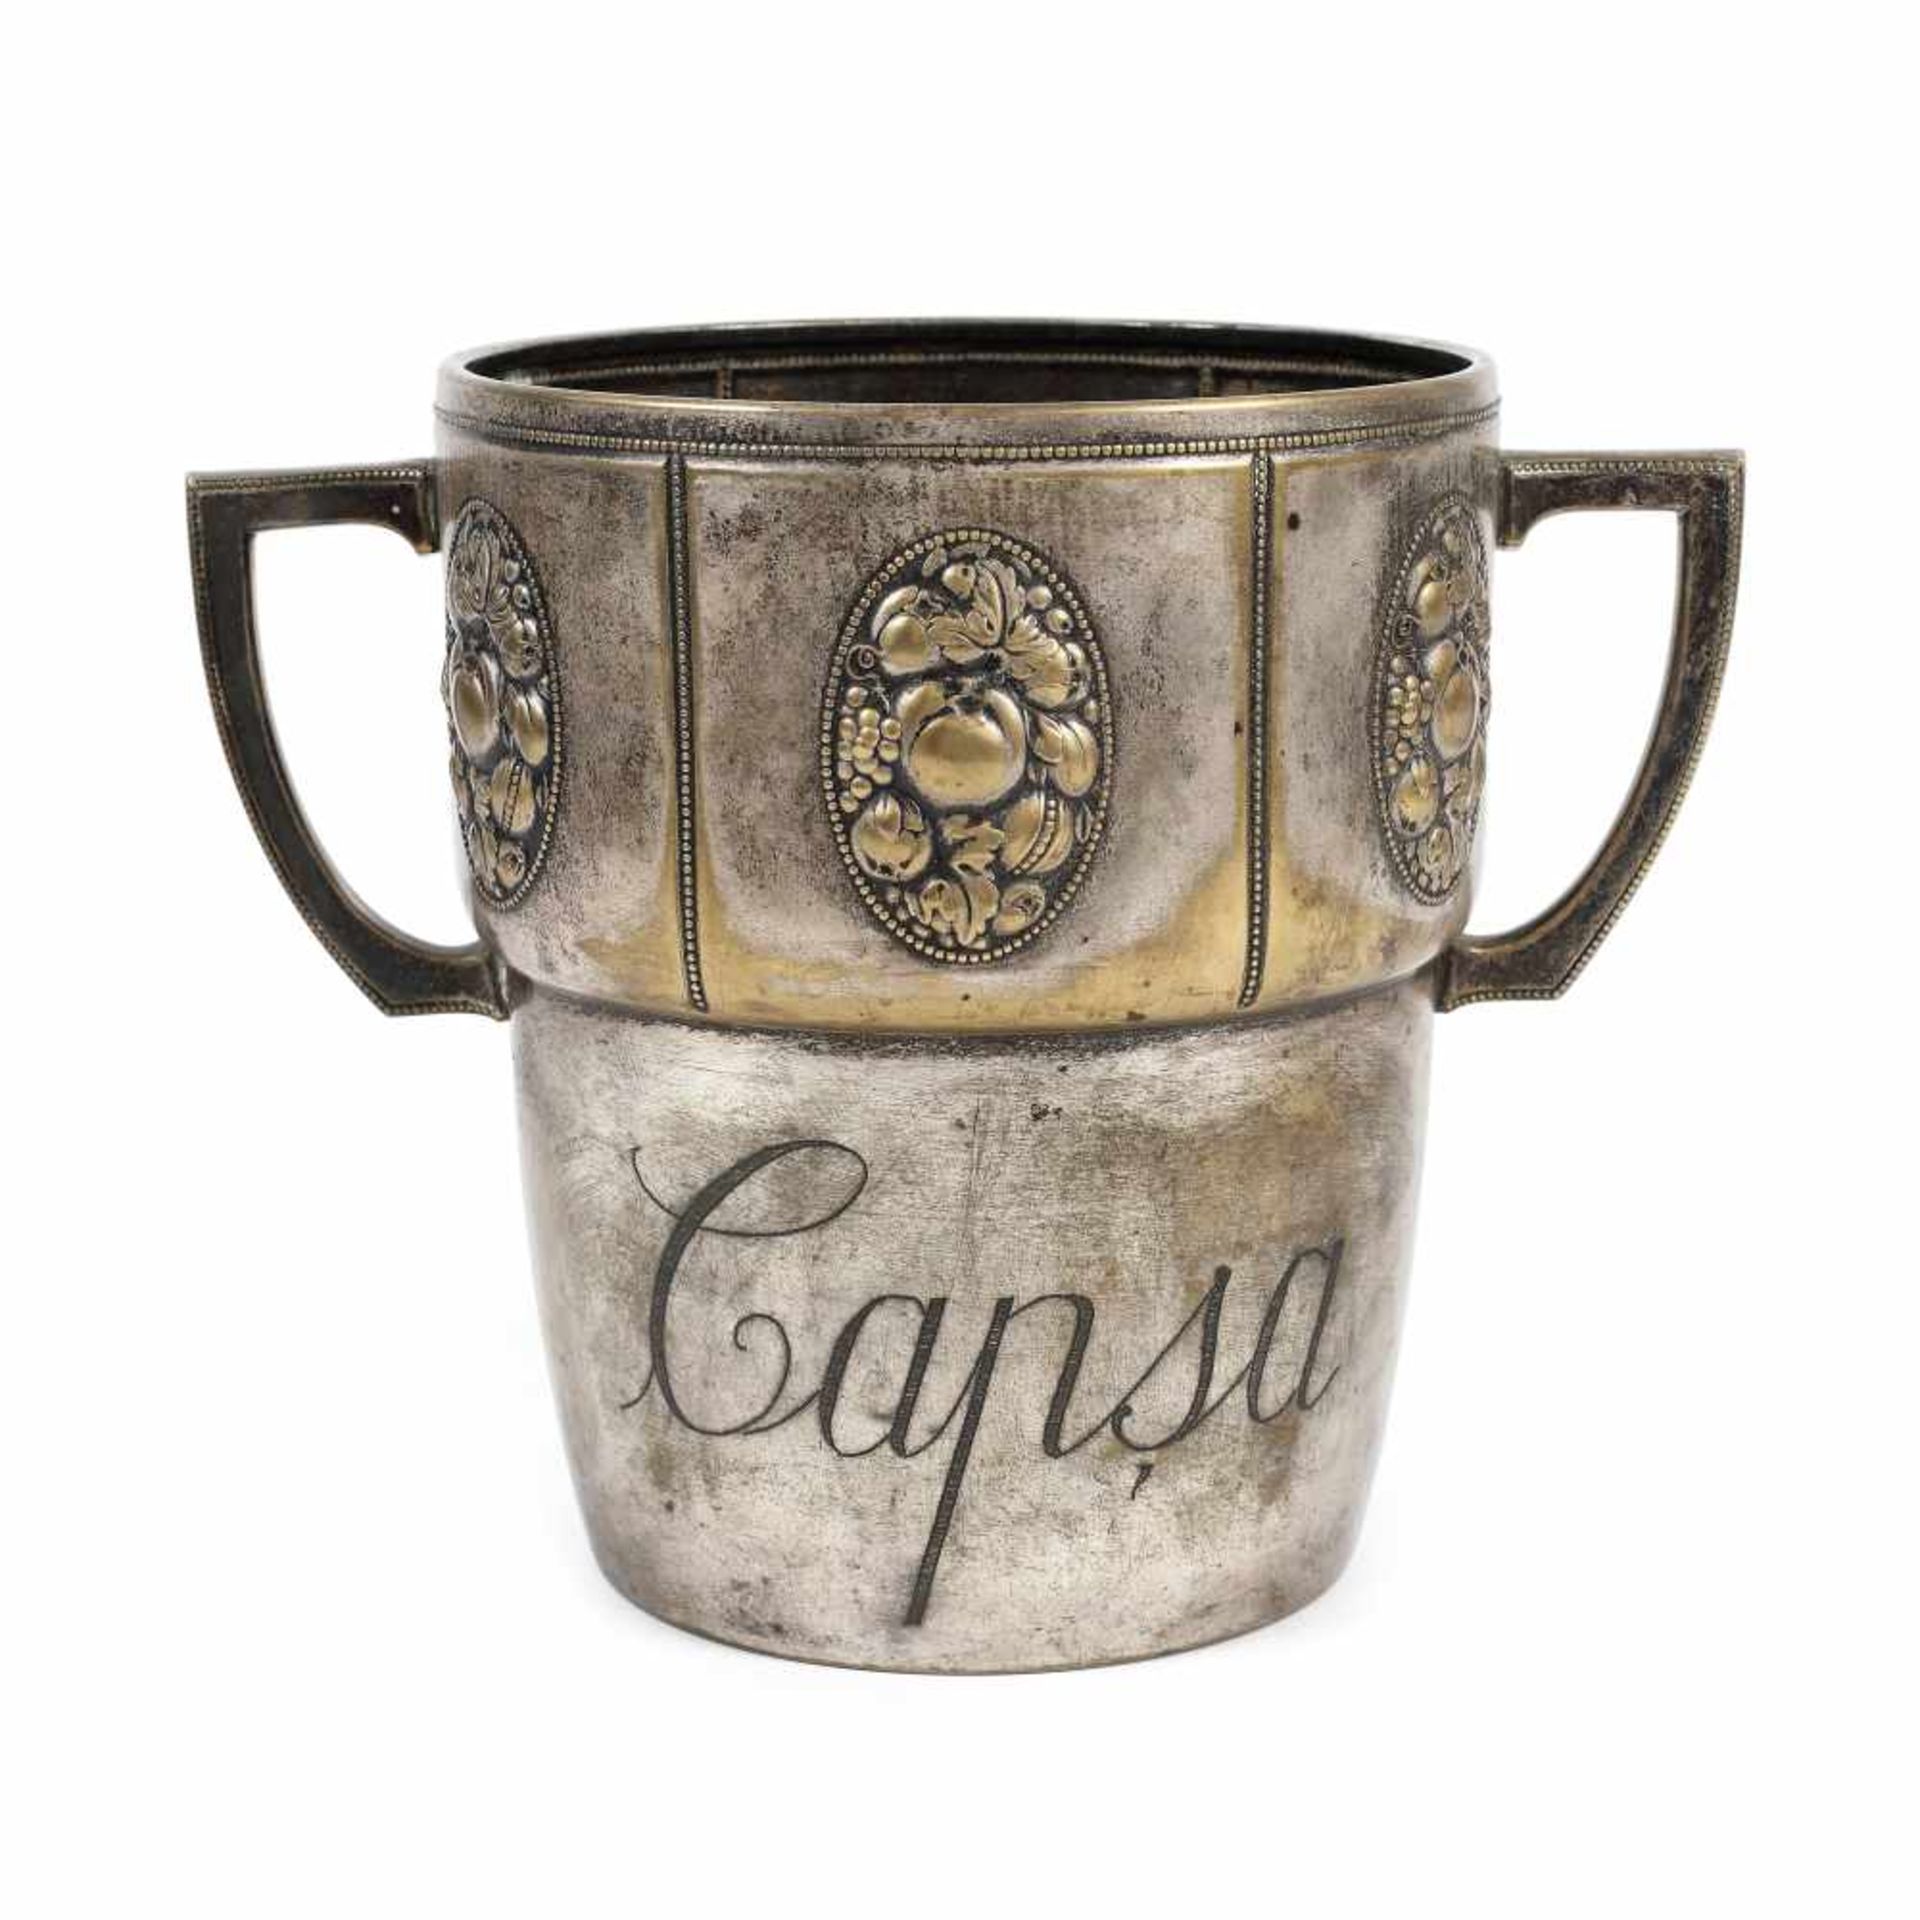 Ice bucket decorated with peonies and grapes, with Casa Capșa brand